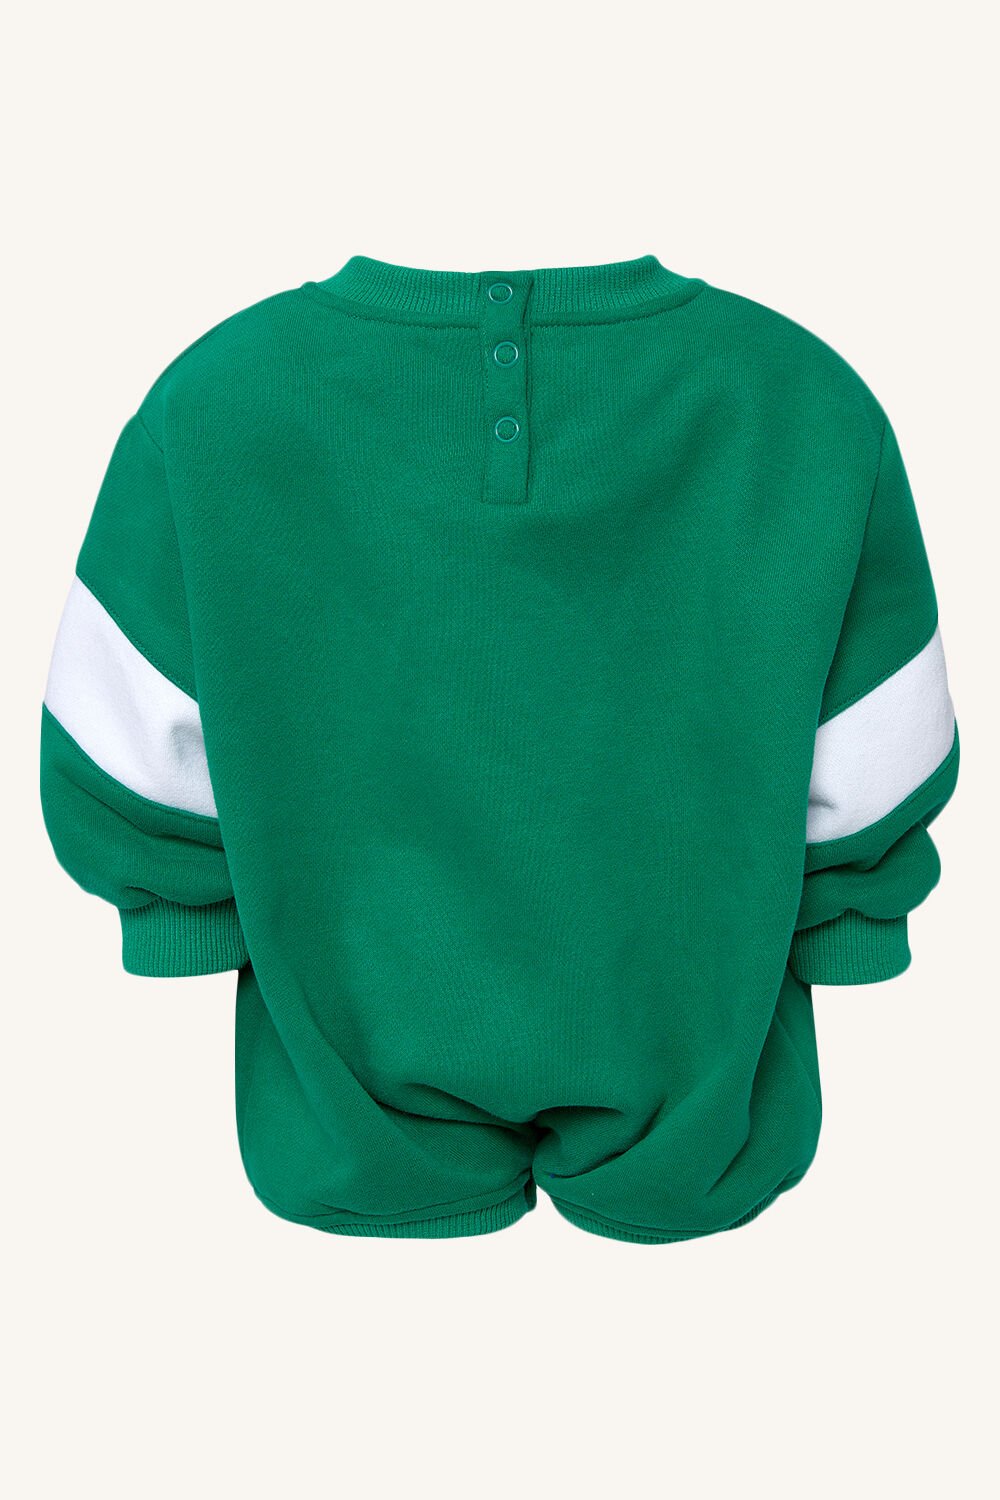 BABY GIRL TRACK SWEATER GROW in colour DEEP GRASS GREEN